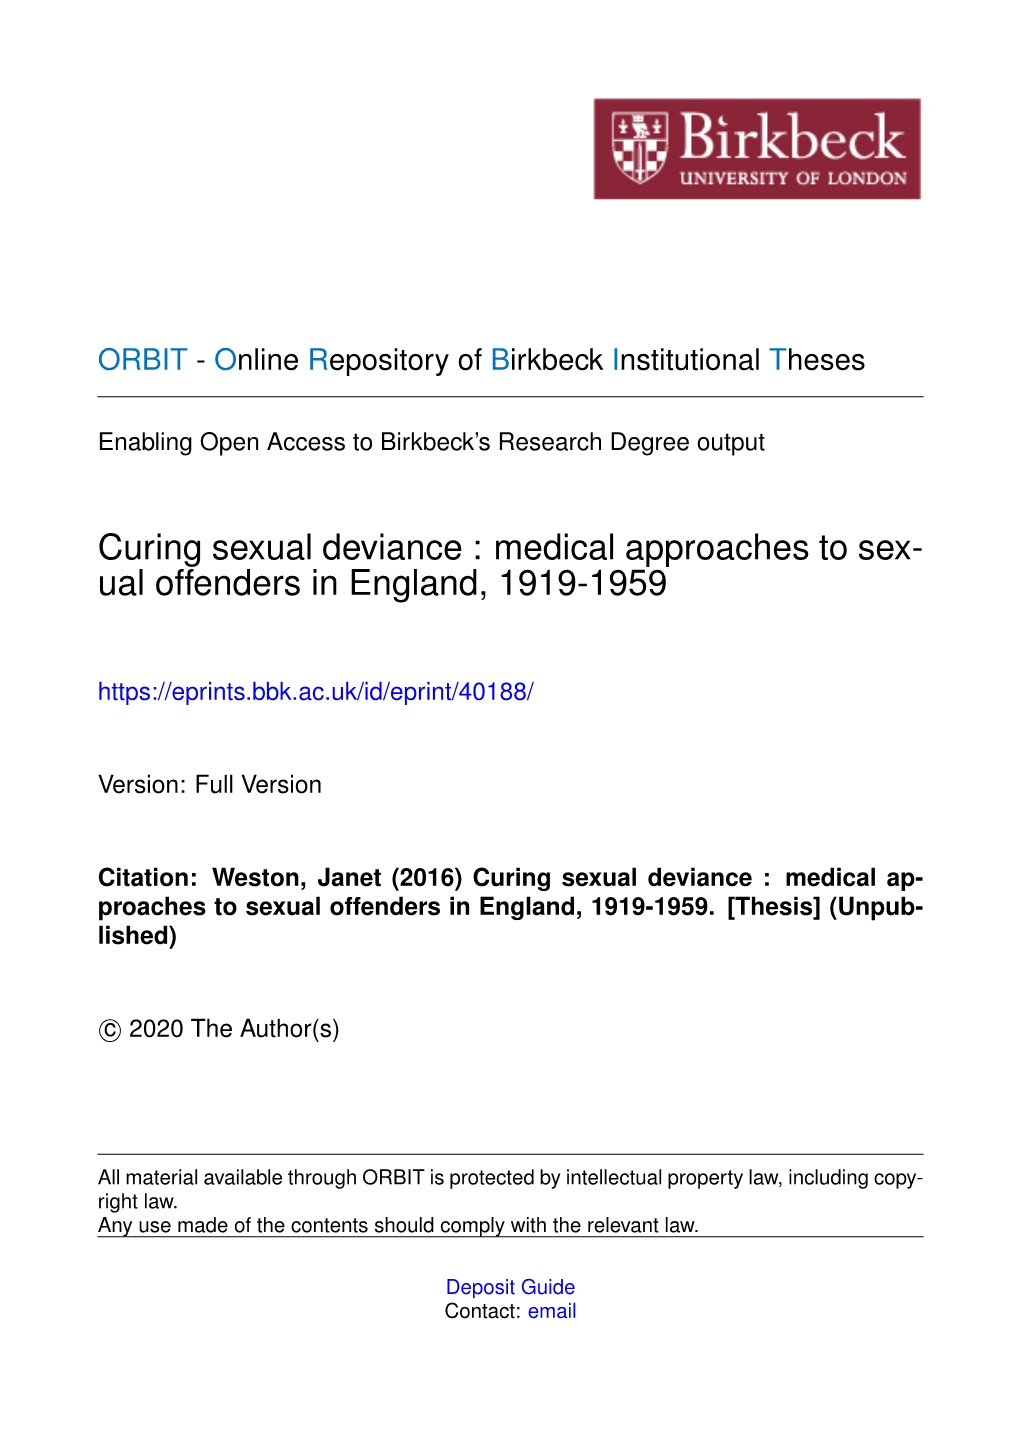 Curing Sexual Deviance : Medical Approaches to Sex- Ual Offenders in England, 1919-1959